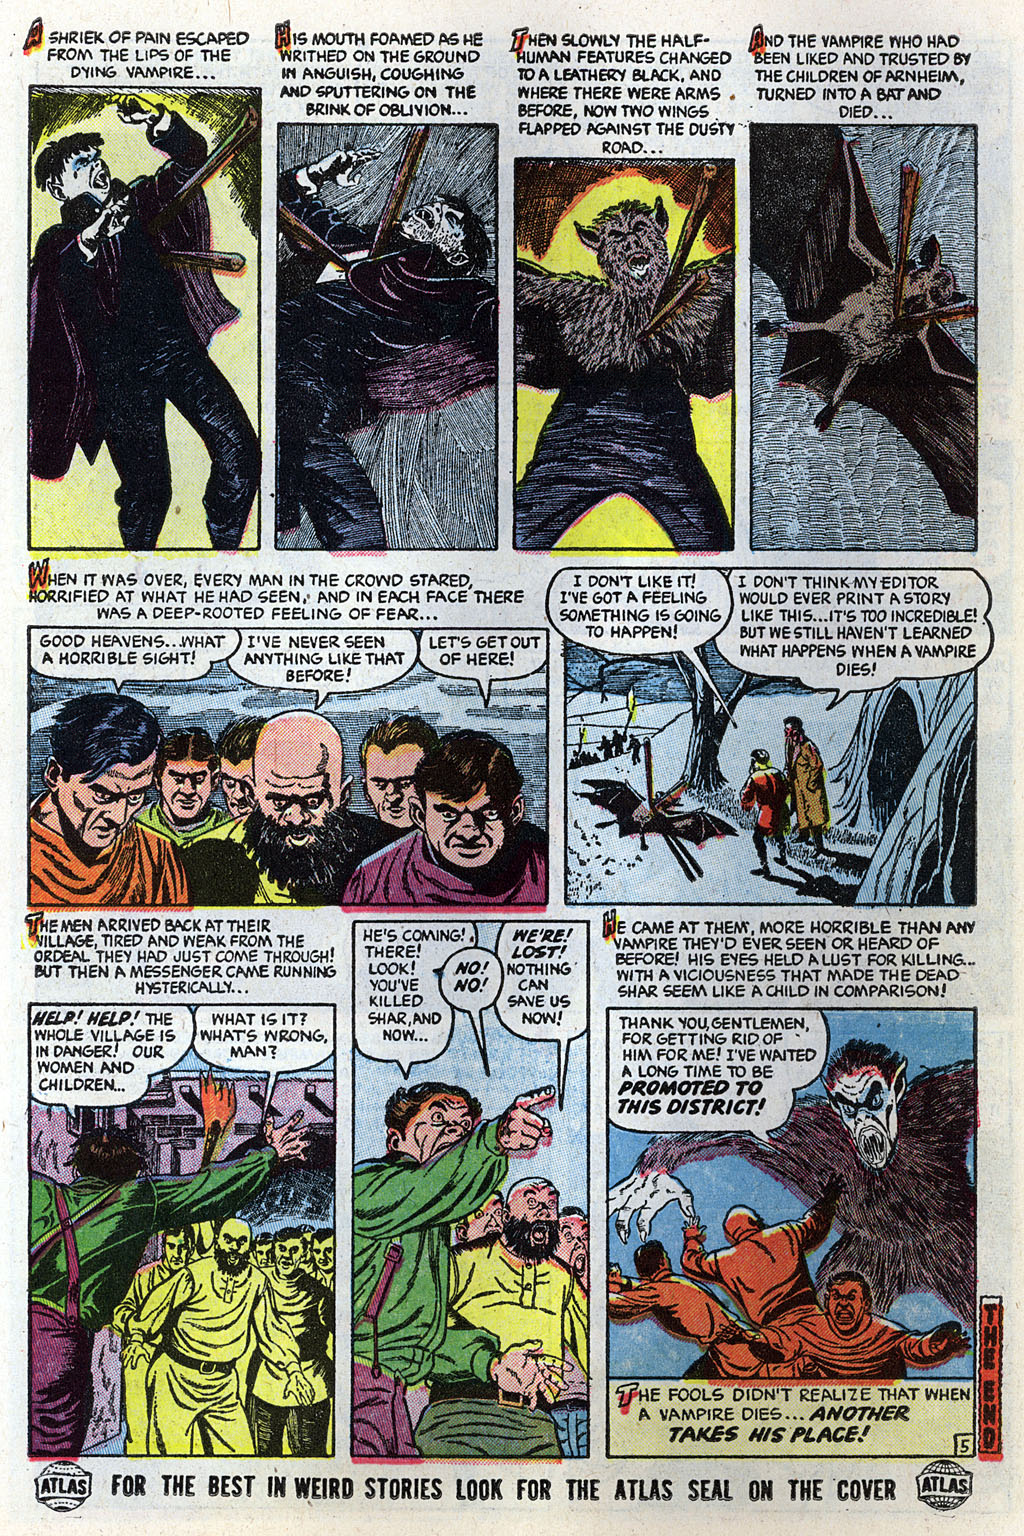 Marvel Tales (1949) 128 Page 13